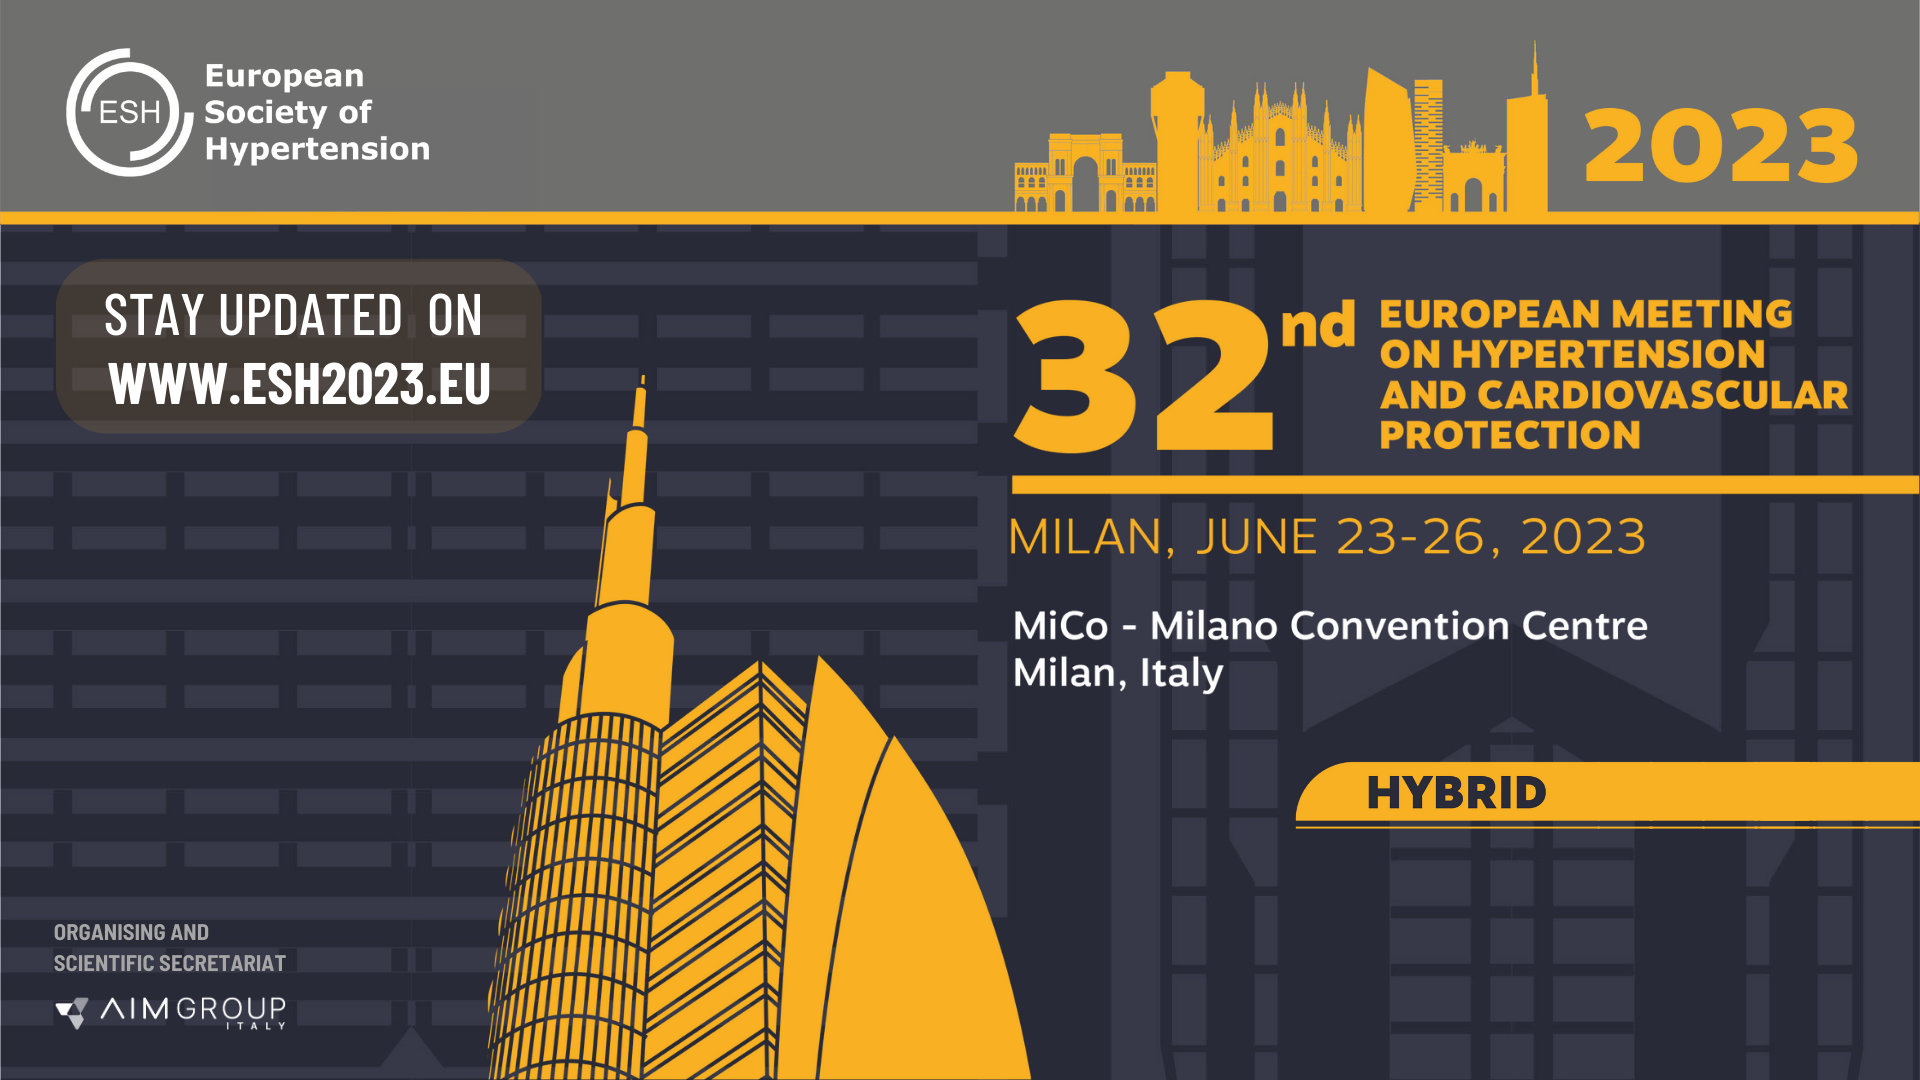 32nd European Meeting on Hypertension and Cardiovascular Protection - Milan, June 23-26, 2023